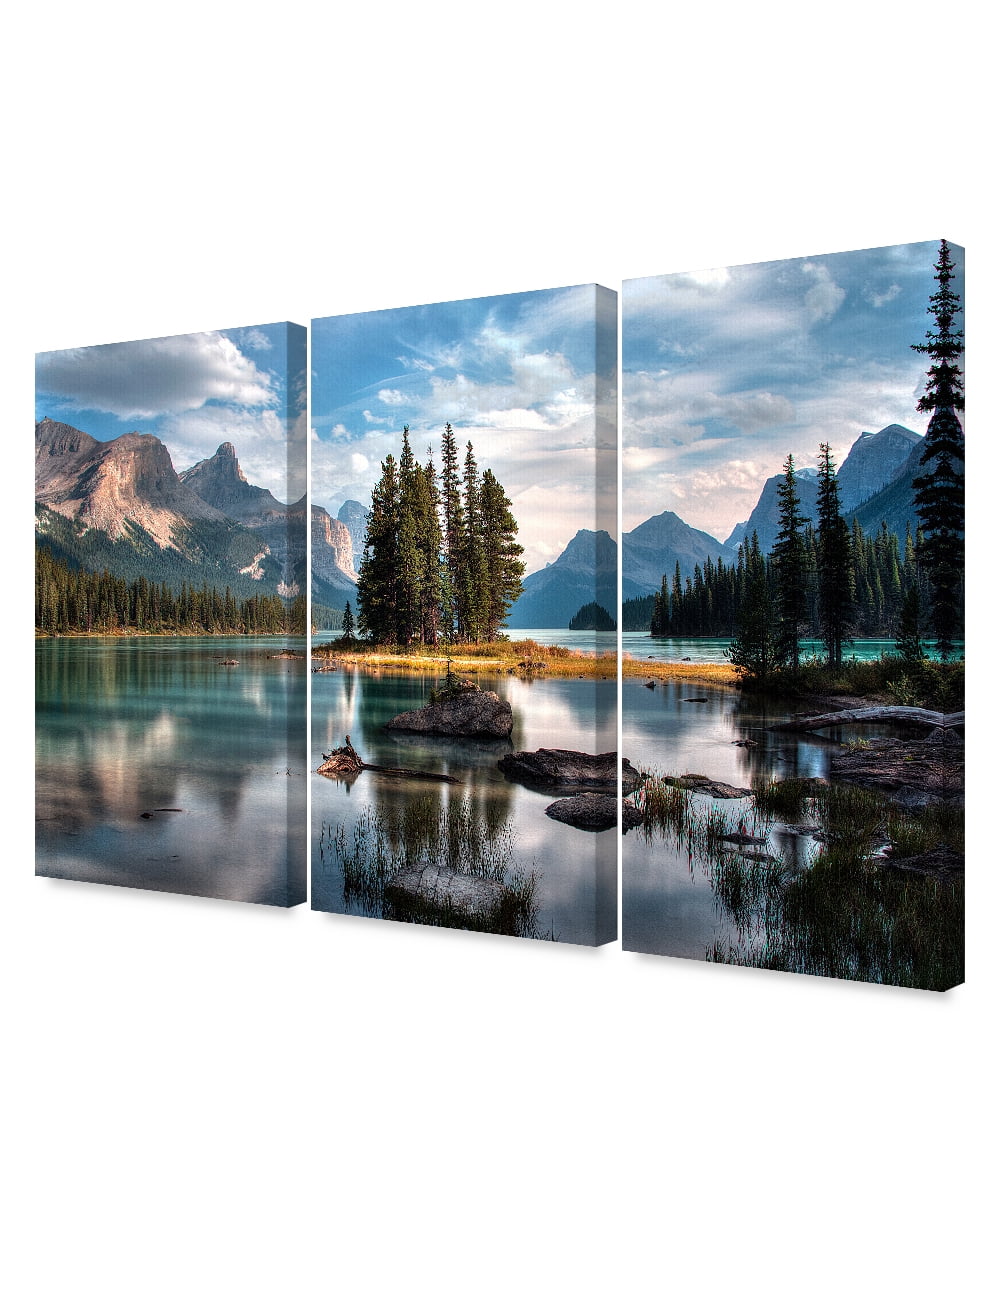 DecorArts Spirit Island, Jasper National with Mountain  Forest(Triptych). Giclee Canvas Prints for Wall Decor.48x32